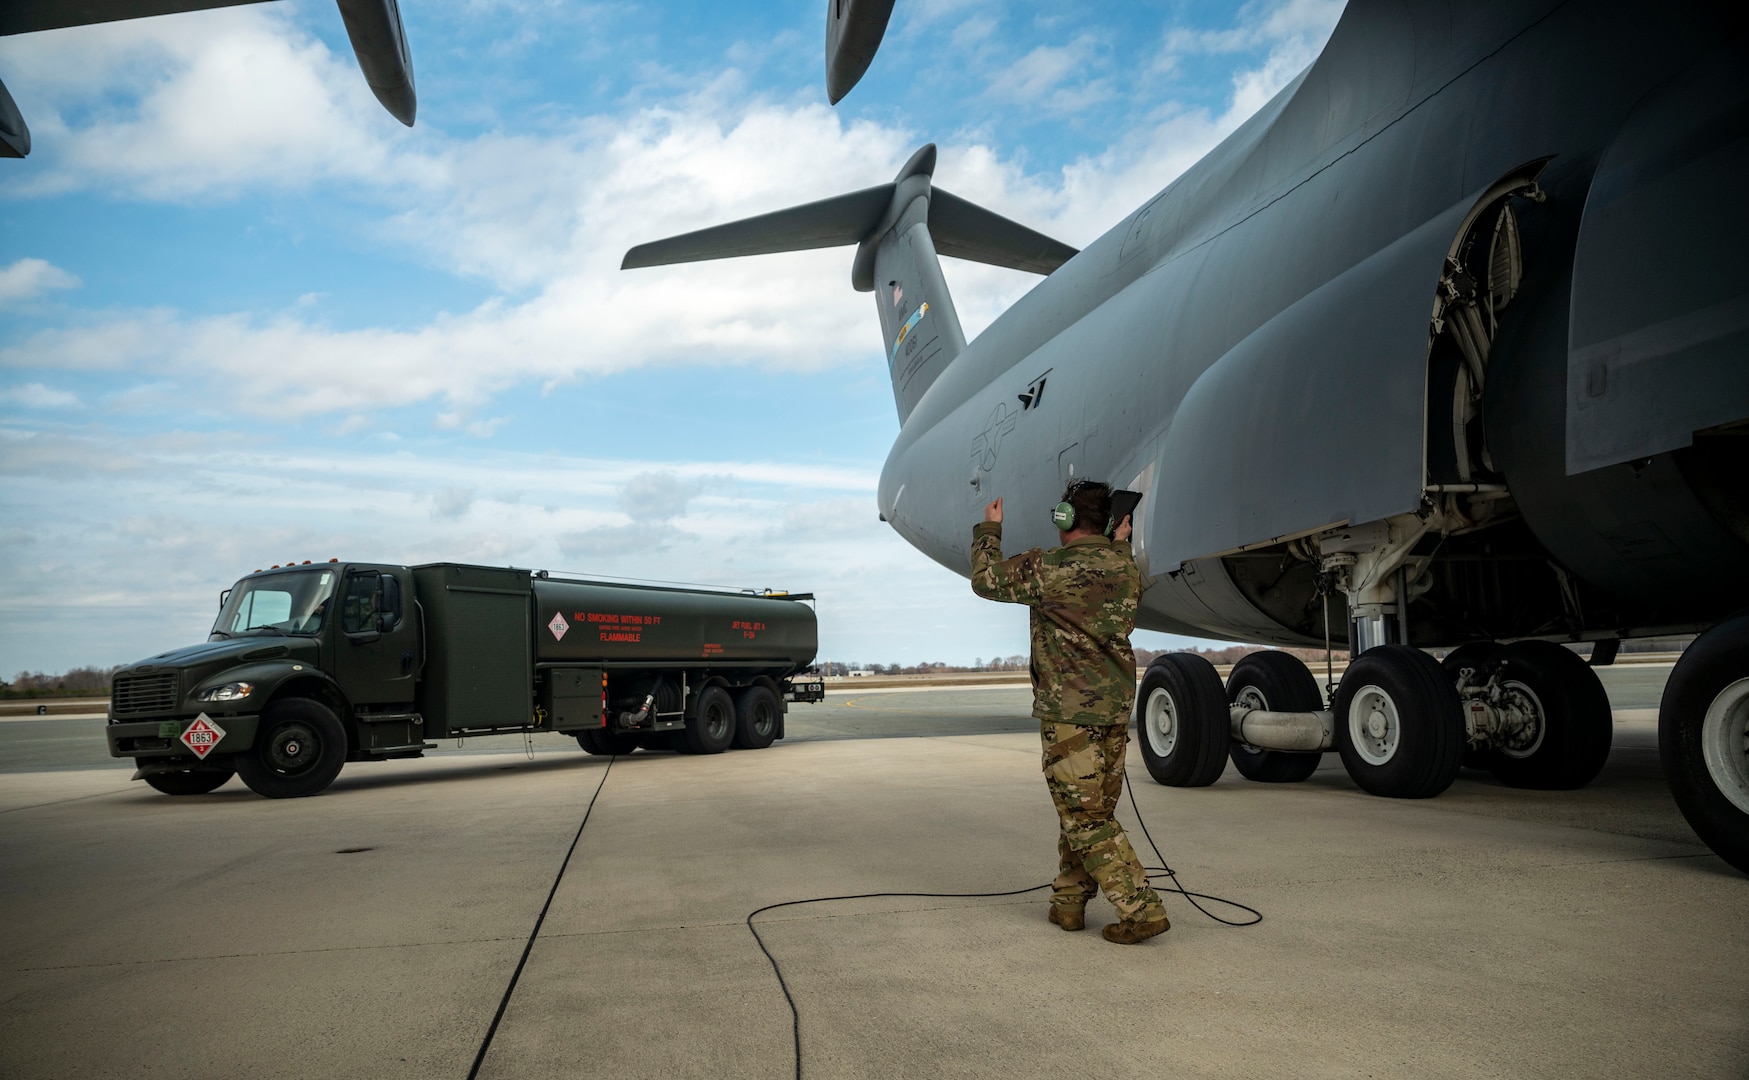 Staff Sgt. Kyle Hewitt, 9th Airlift Squadron flight engineer, marshals an R-11 Refueler next to a C-5M Super Galaxy during a wet wing defuel at Dover Air Force Base, Delaware, March 1, 2023. Aircrew with the 9th AS test out new capabilities that allow the C-5 to act as a mobile fuel station and deposit fuel from the aircraft fuel tanks, into tankers standing by. (U.S. Air Force photo by Staff Sgt. Marco A. Gomez)